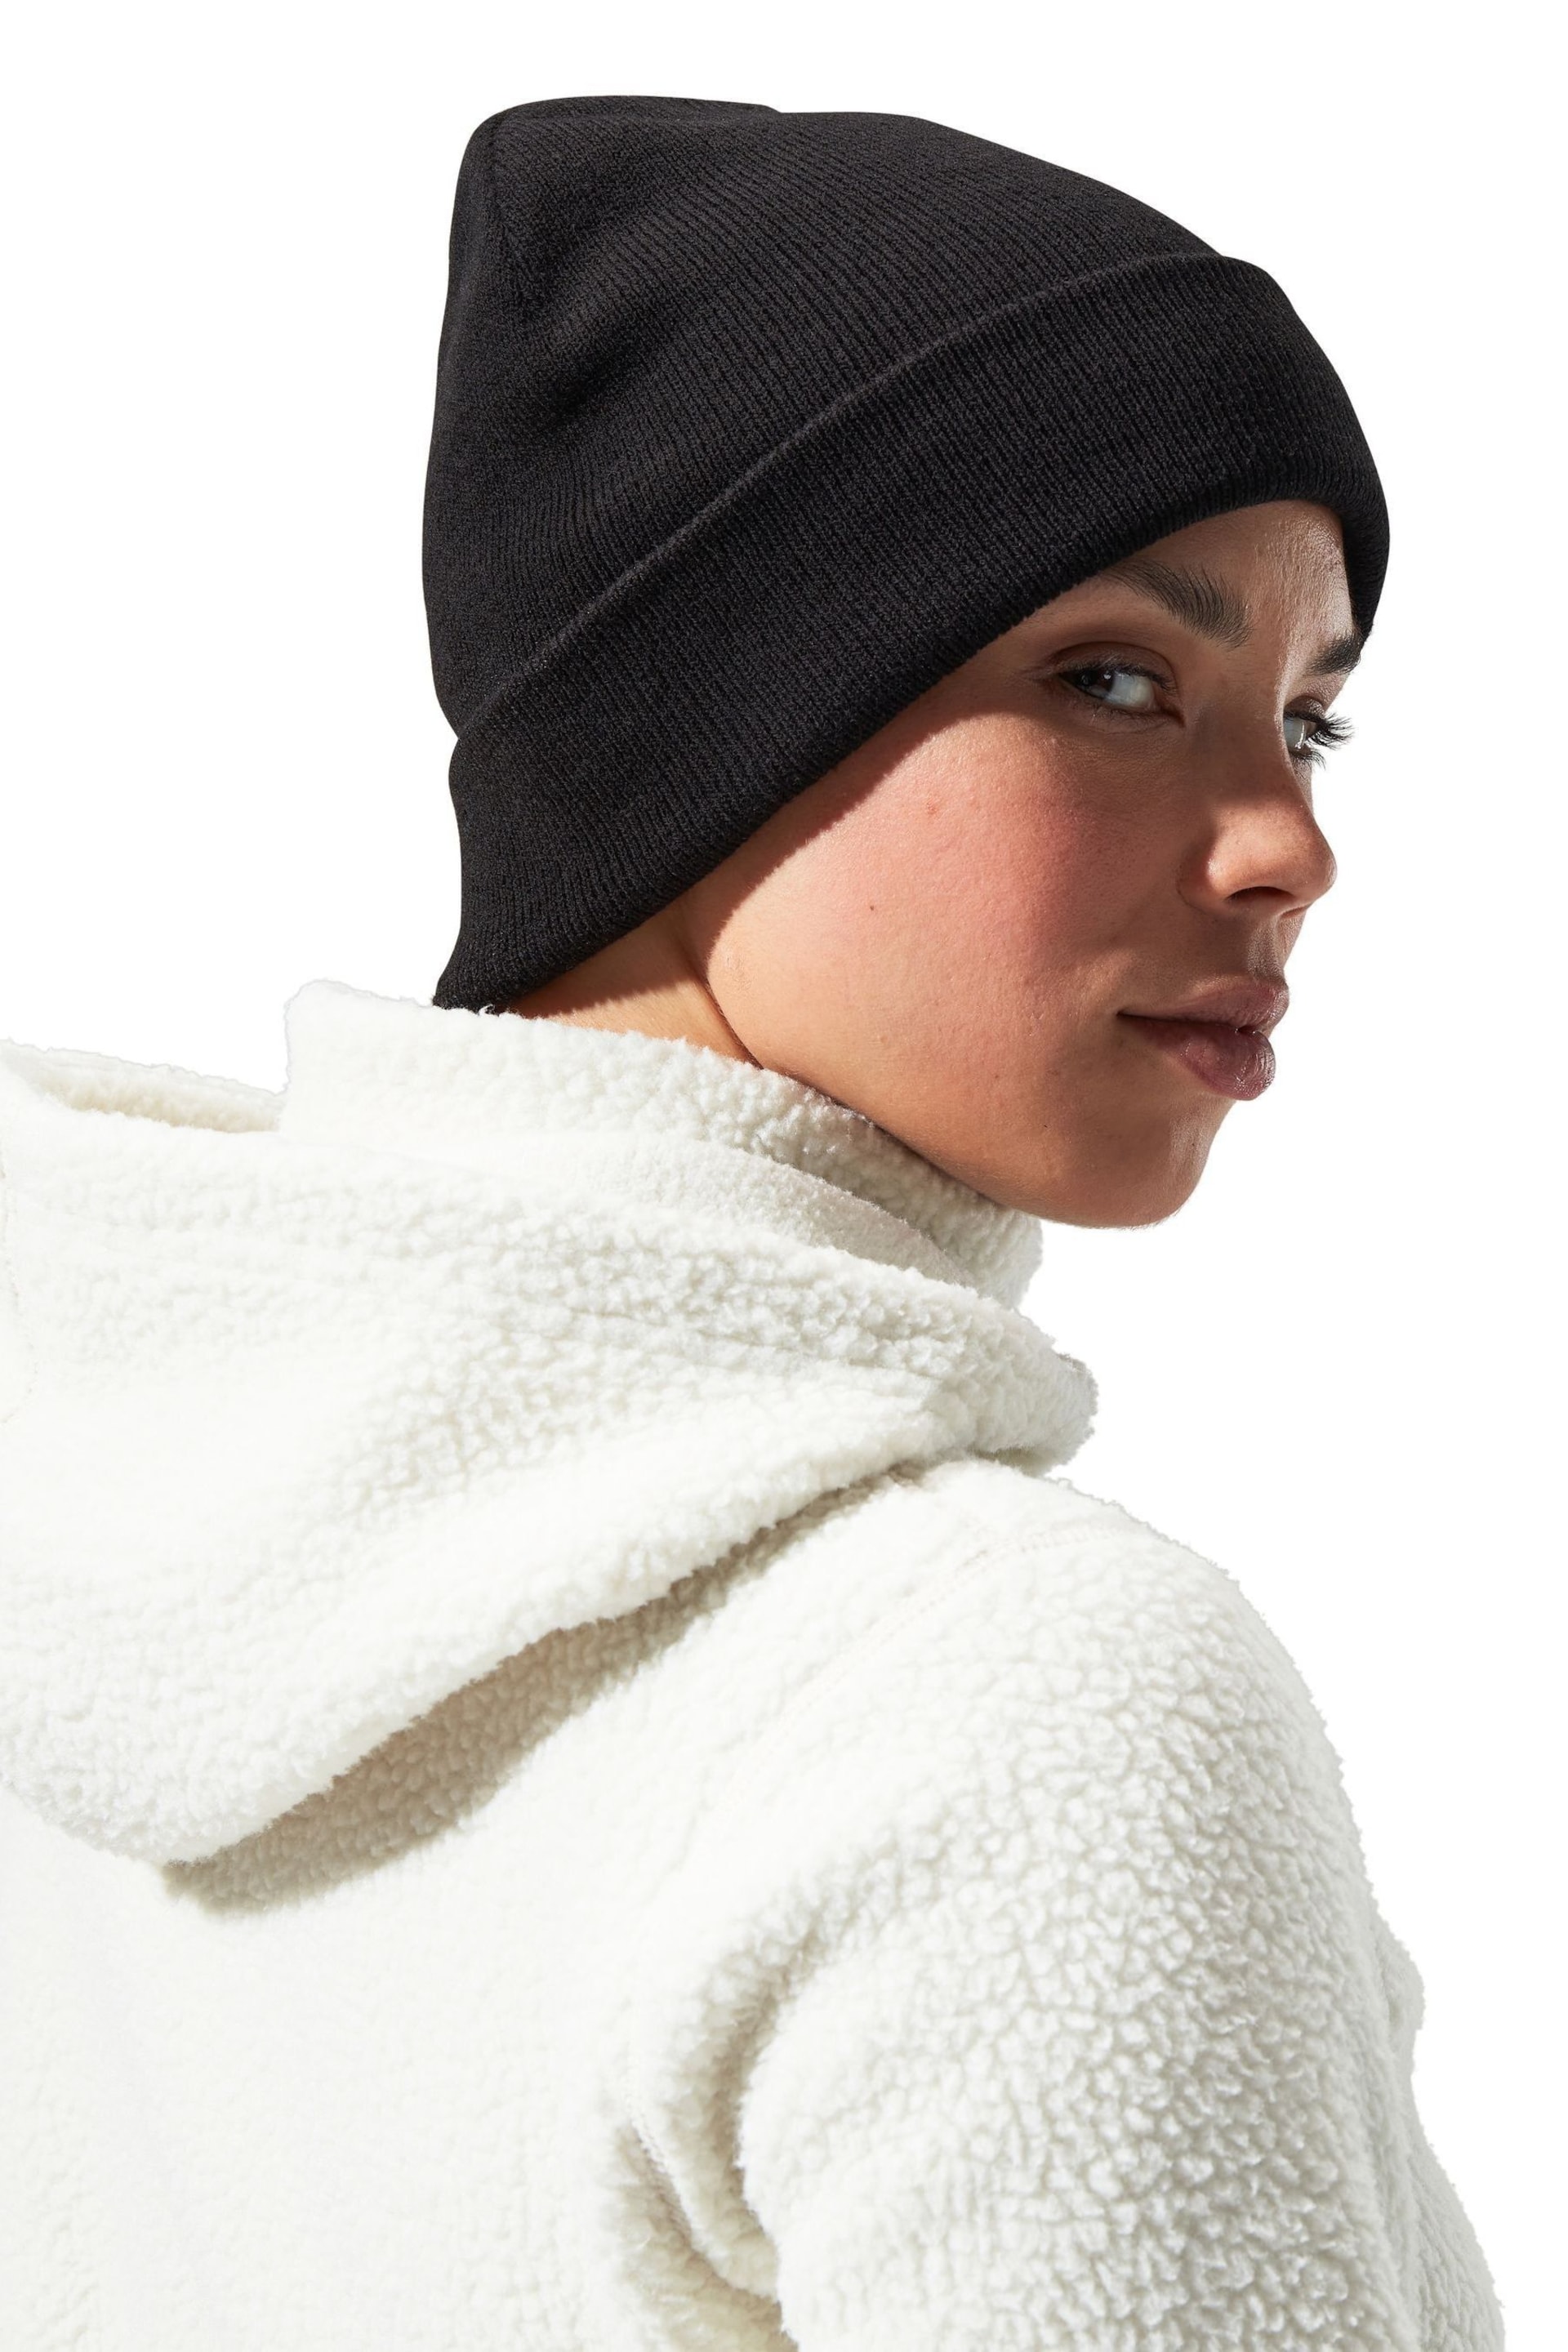 Berghaus Inflection Black Beanie - Image 8 of 8